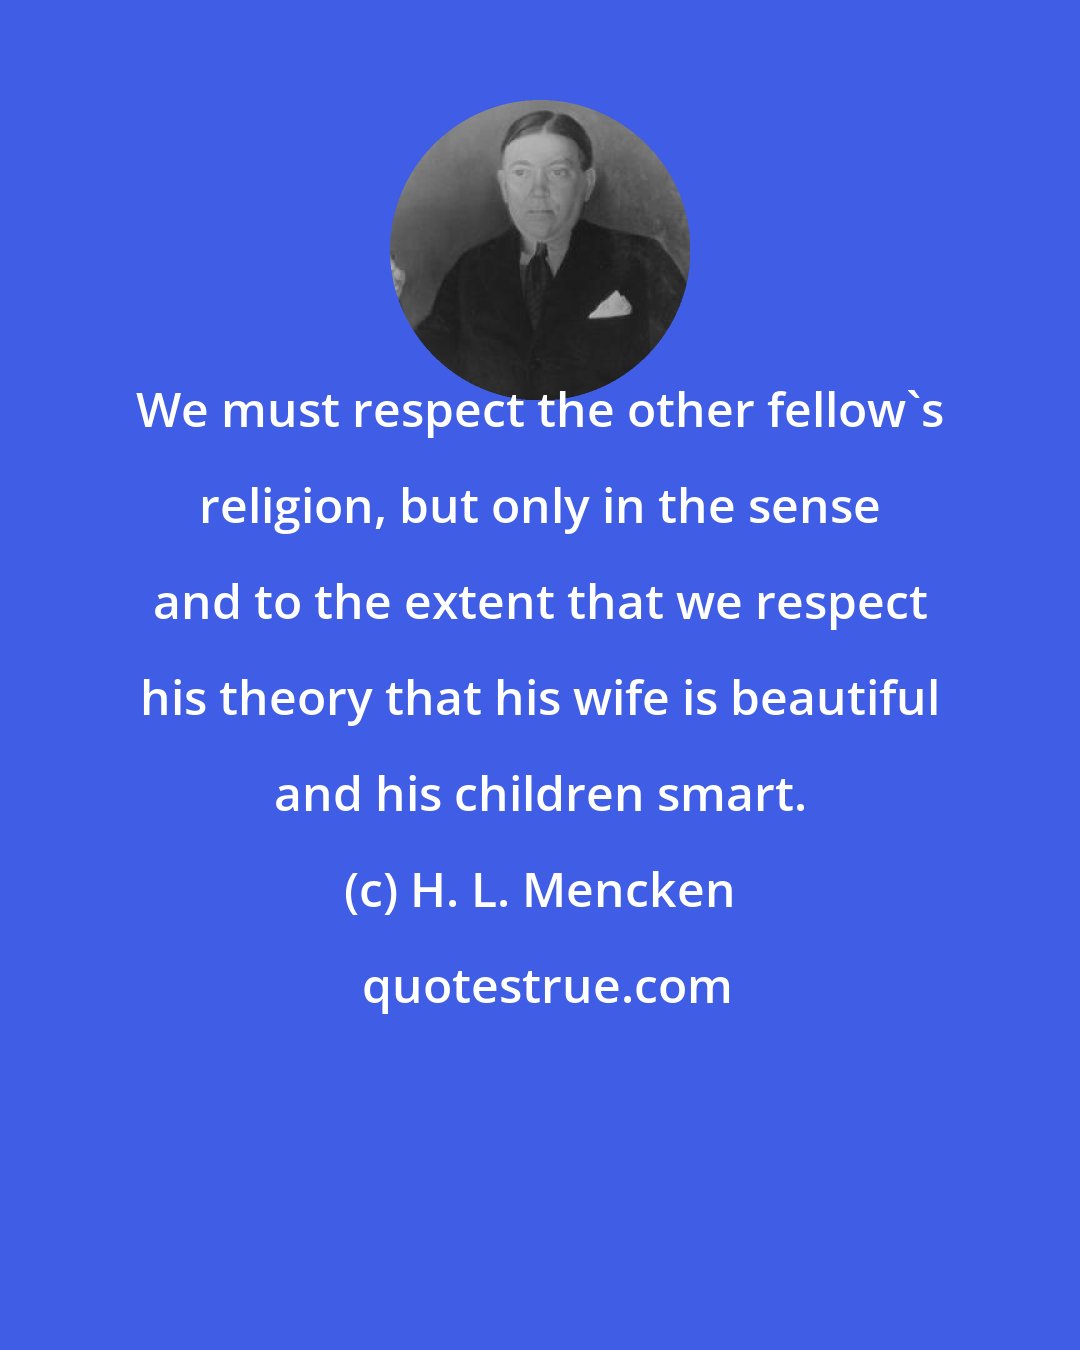 H. L. Mencken: We must respect the other fellow's religion, but only in the sense and to the extent that we respect his theory that his wife is beautiful and his children smart.